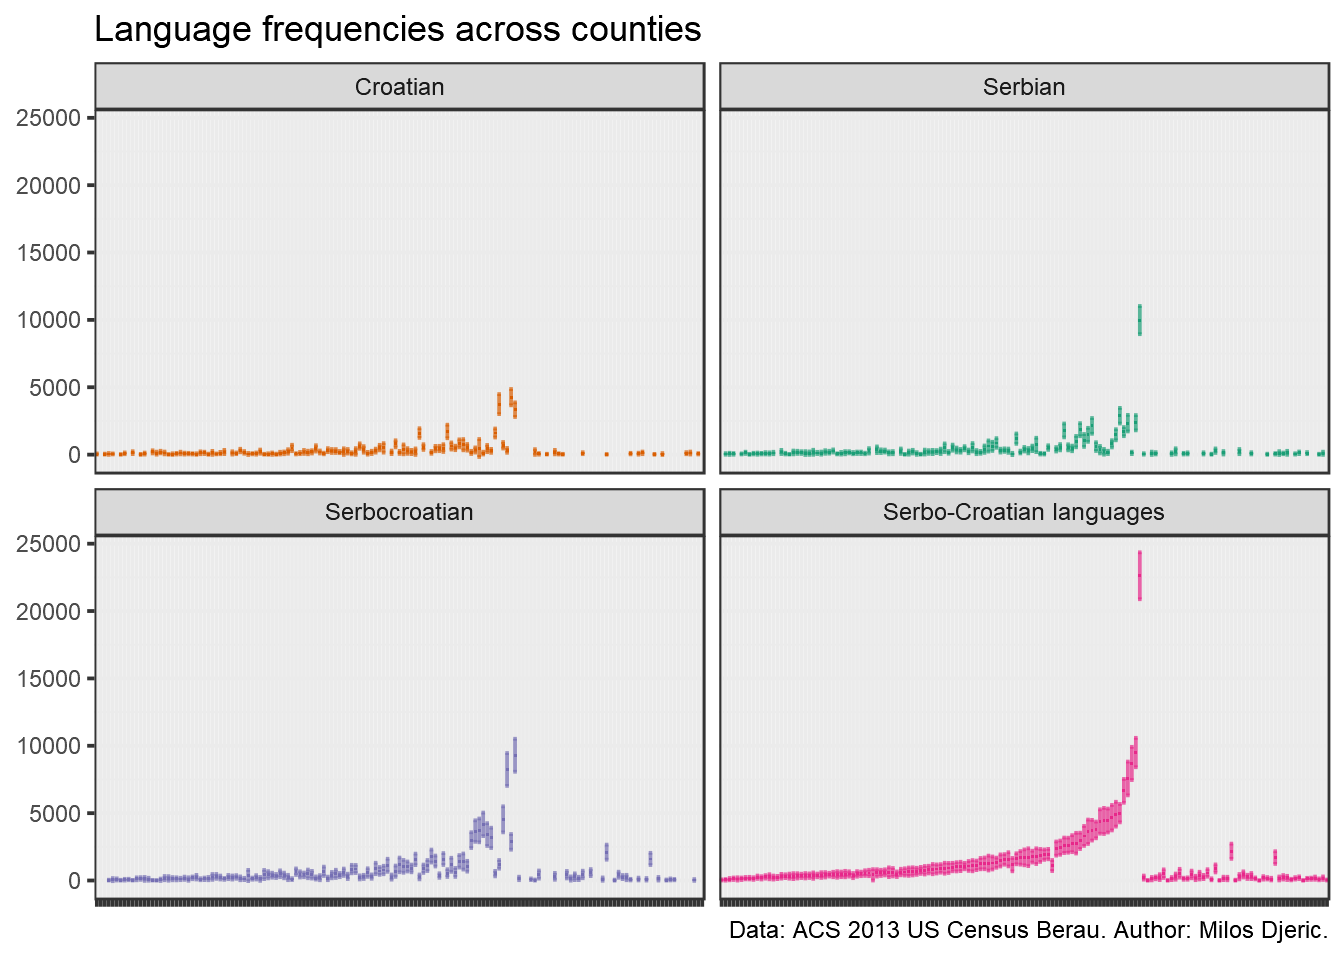 Four charts with individual counties and number of people speaking: Croatian, Serbian, Serbocroatian, and Serbo-Croatian languages. One county stands out with more than 20,000, others are all below 10,000.